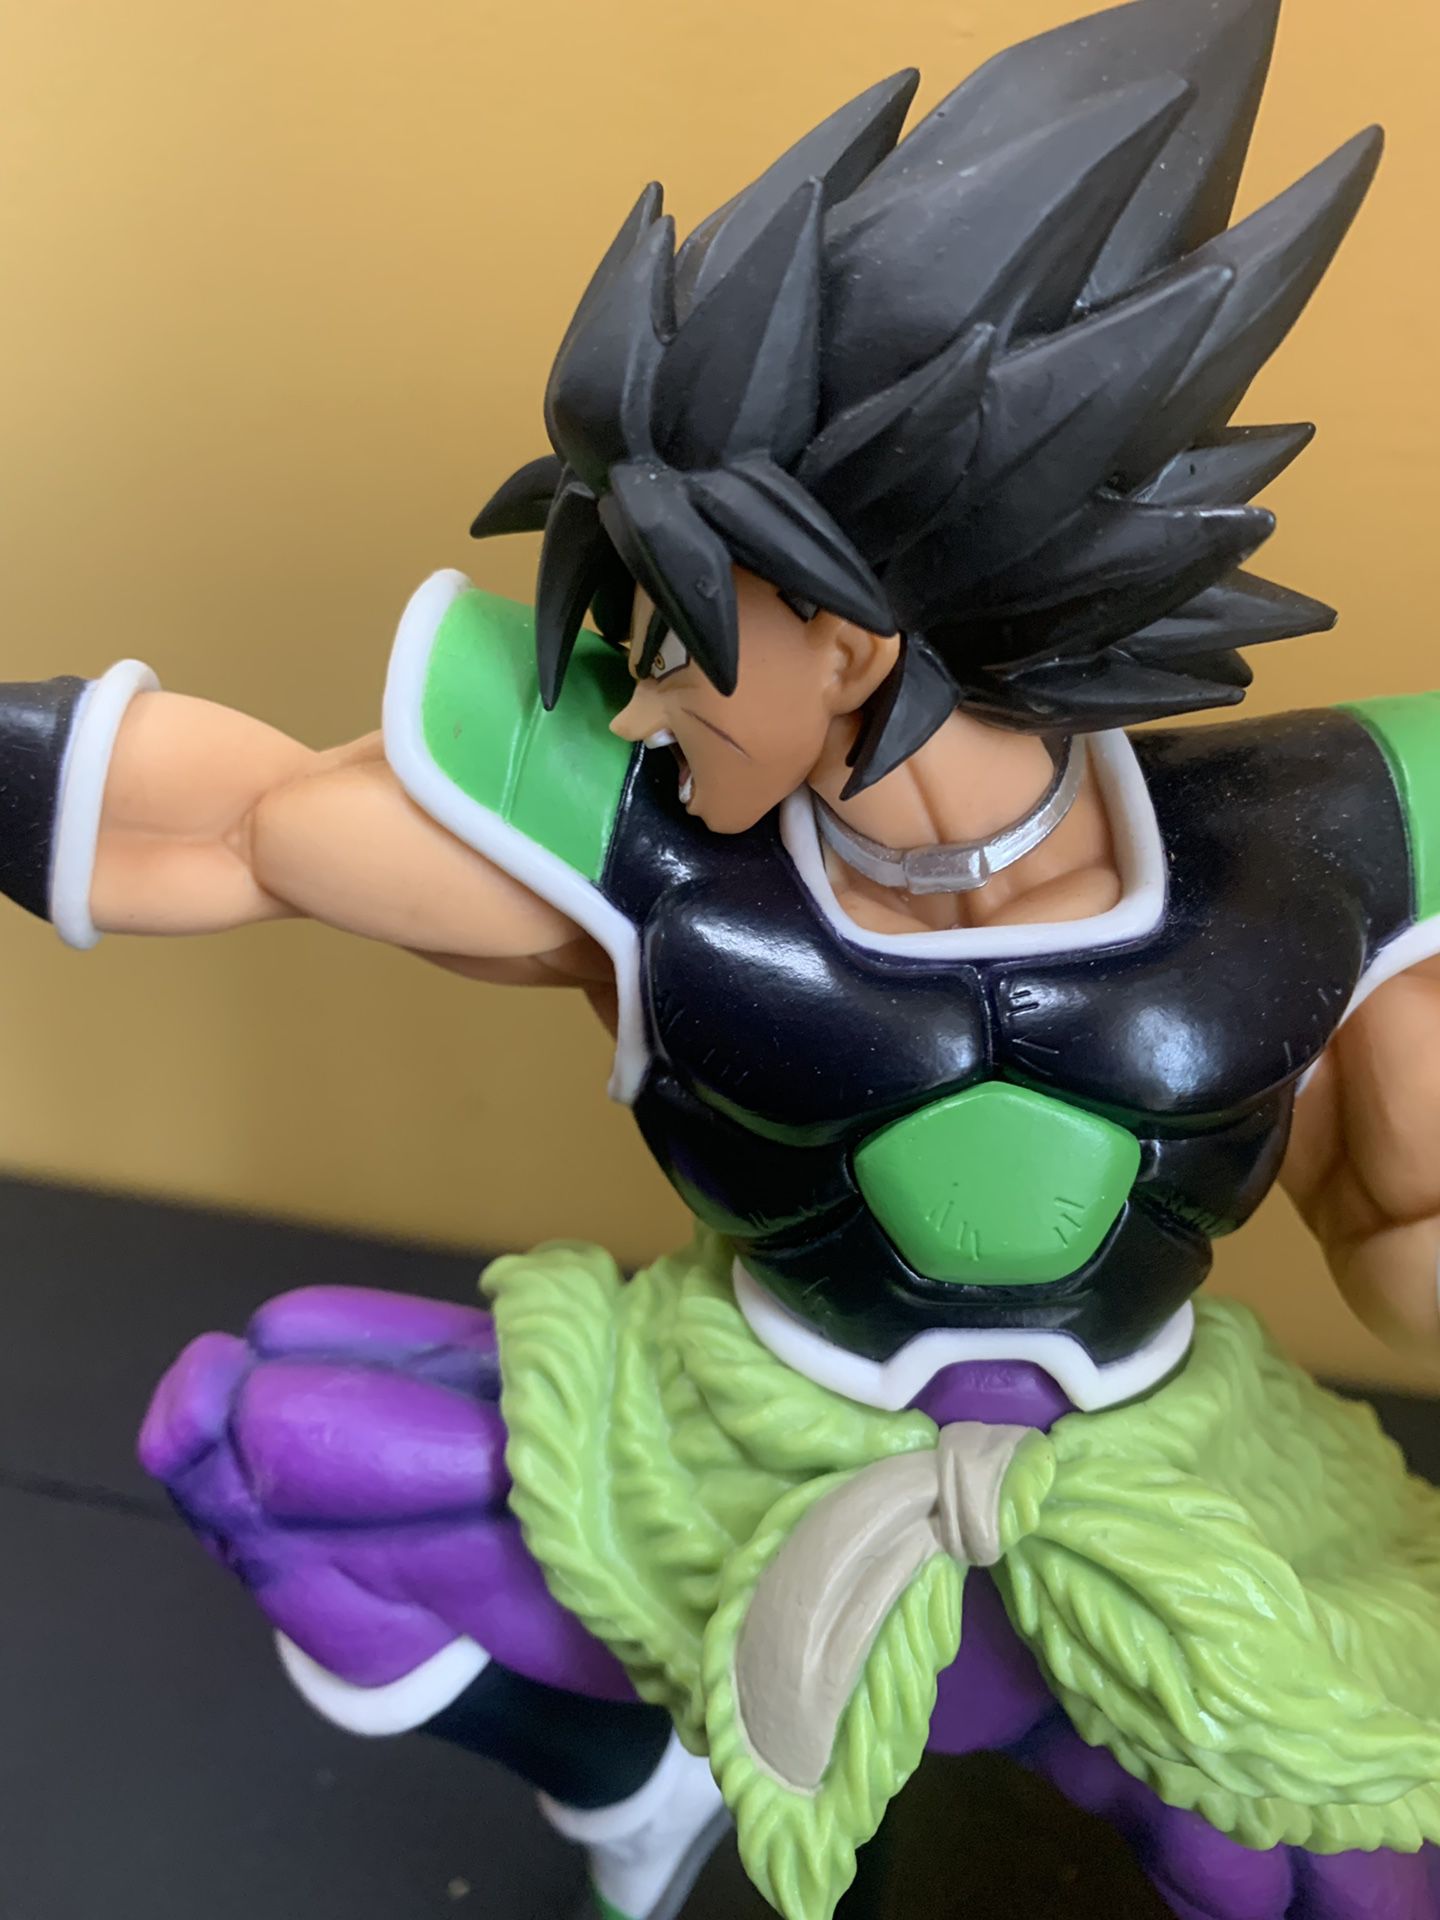 Broly and Frieza. Collectible. $30 each or both for $50